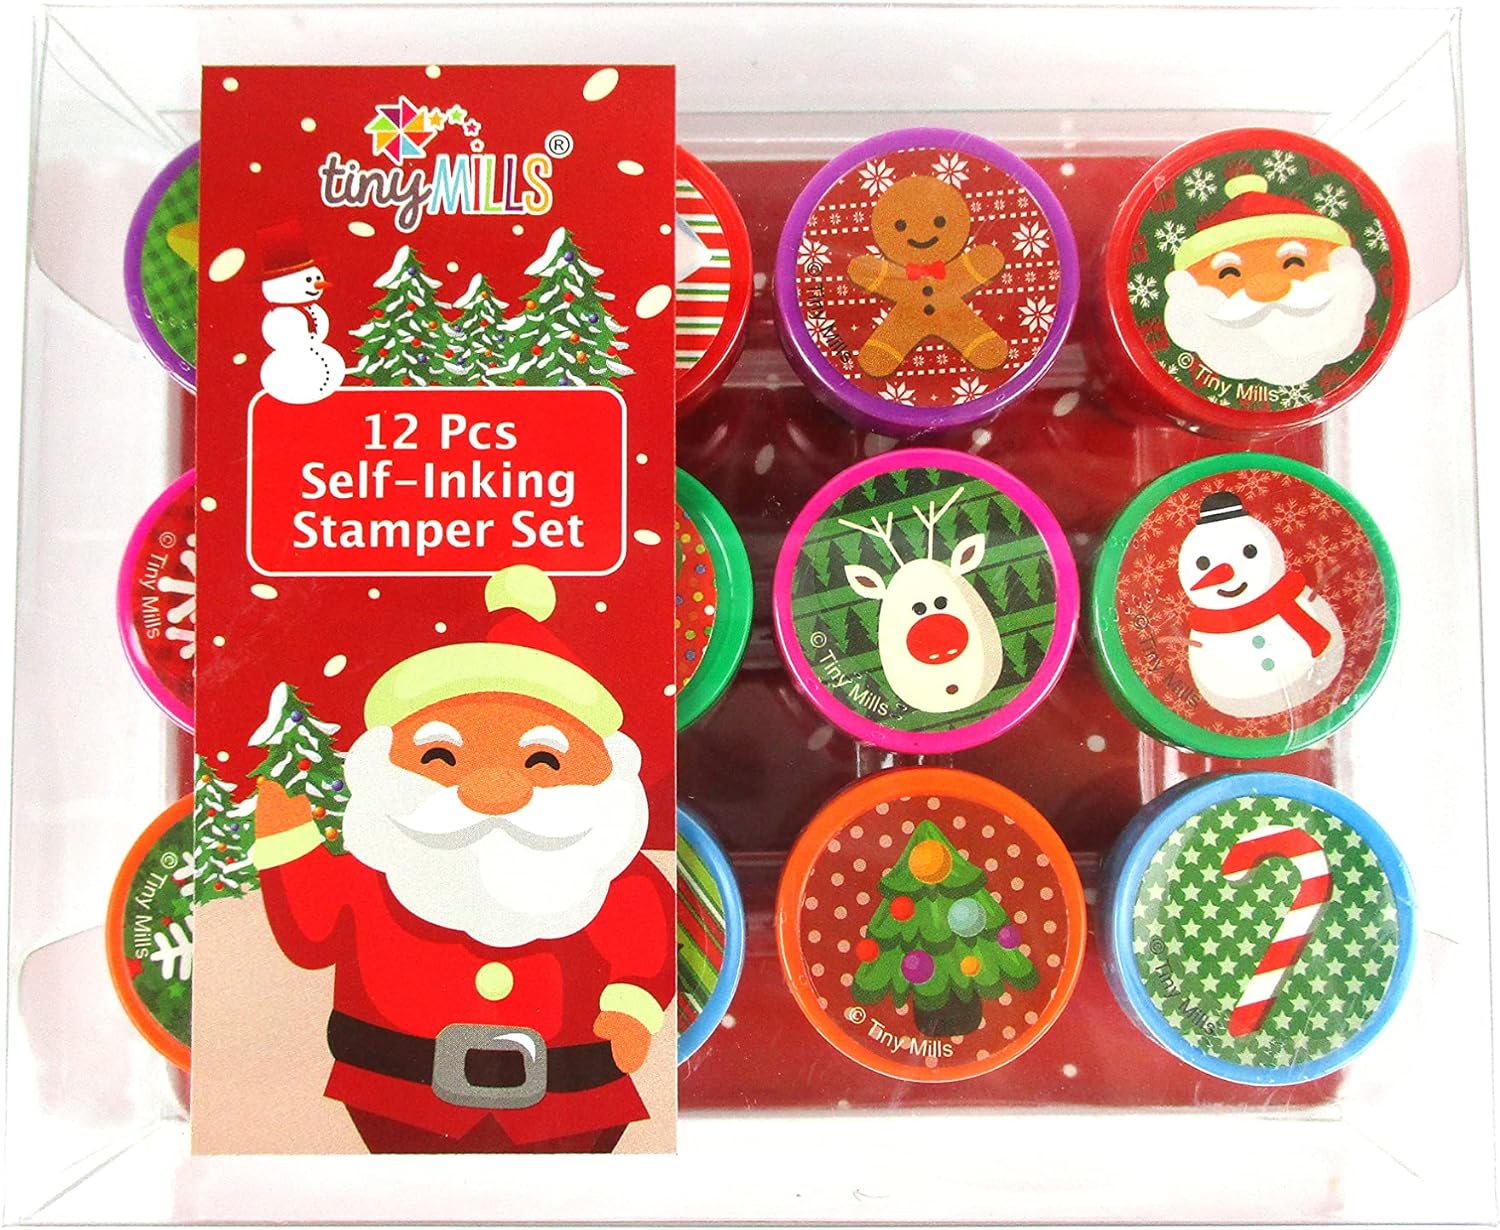 TINYMILLS 12 Pcs Christmas Holiday Stamp Kit for Kids - Christmas Santa  Claus Self Inking Stamps Gift Party Favors Stocking Stuffers Holiday Gift  Party Rewards…